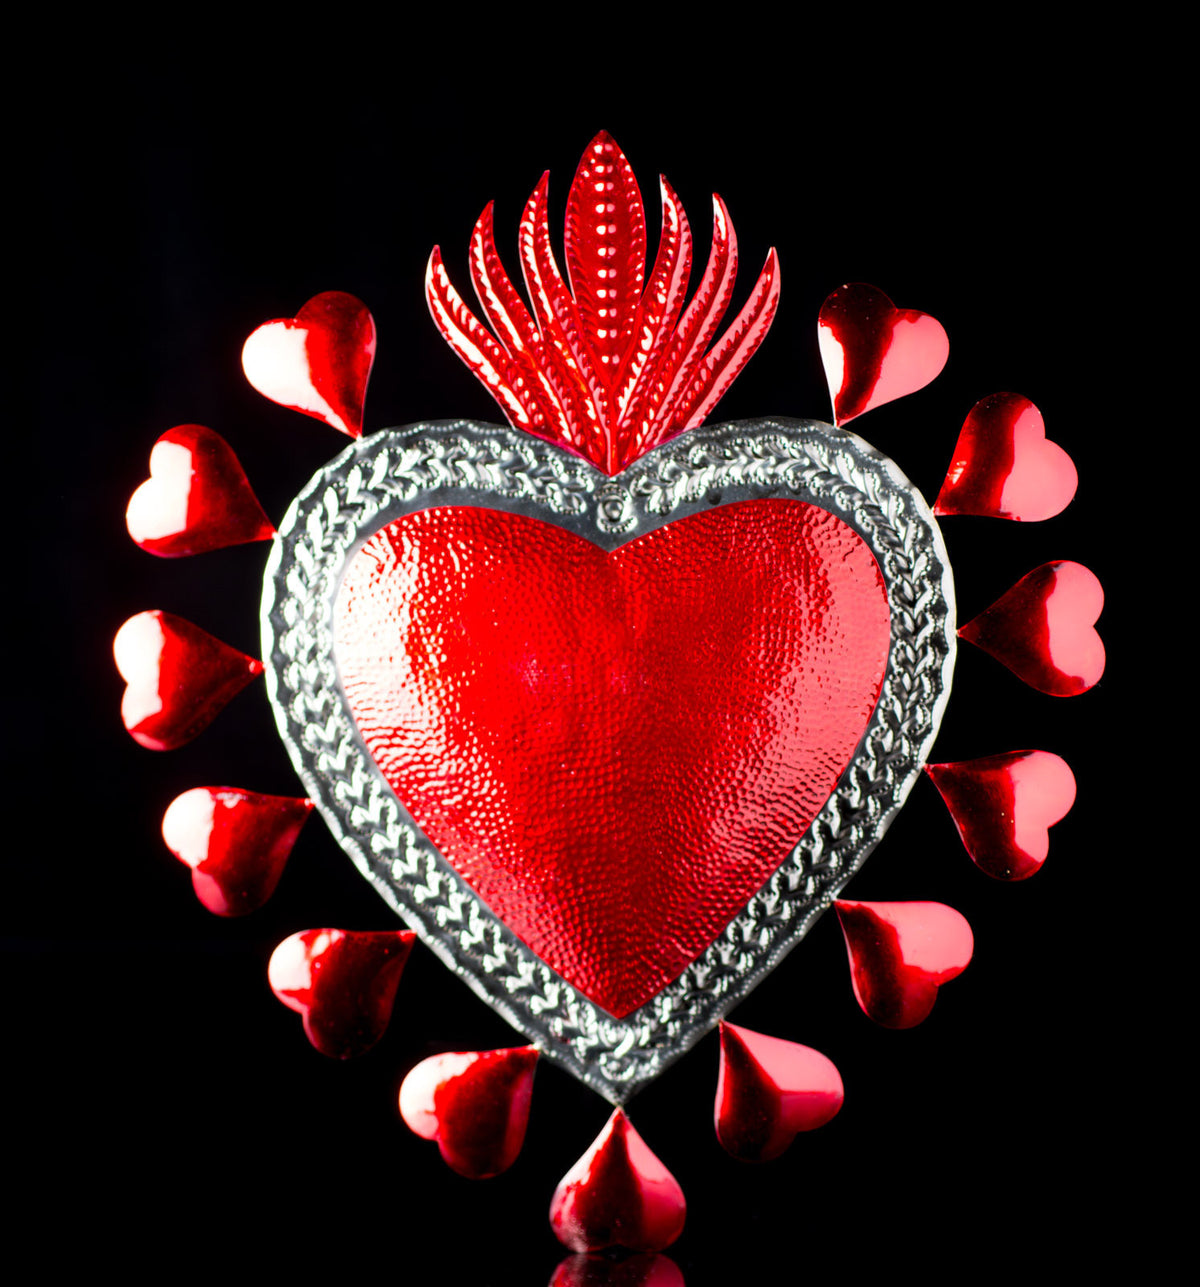 BIG RED TIN SACRED HEART SURROUNDED WITH SMALL HERATS & FLAME ON TOP ART FROM OAXACA MEXICO